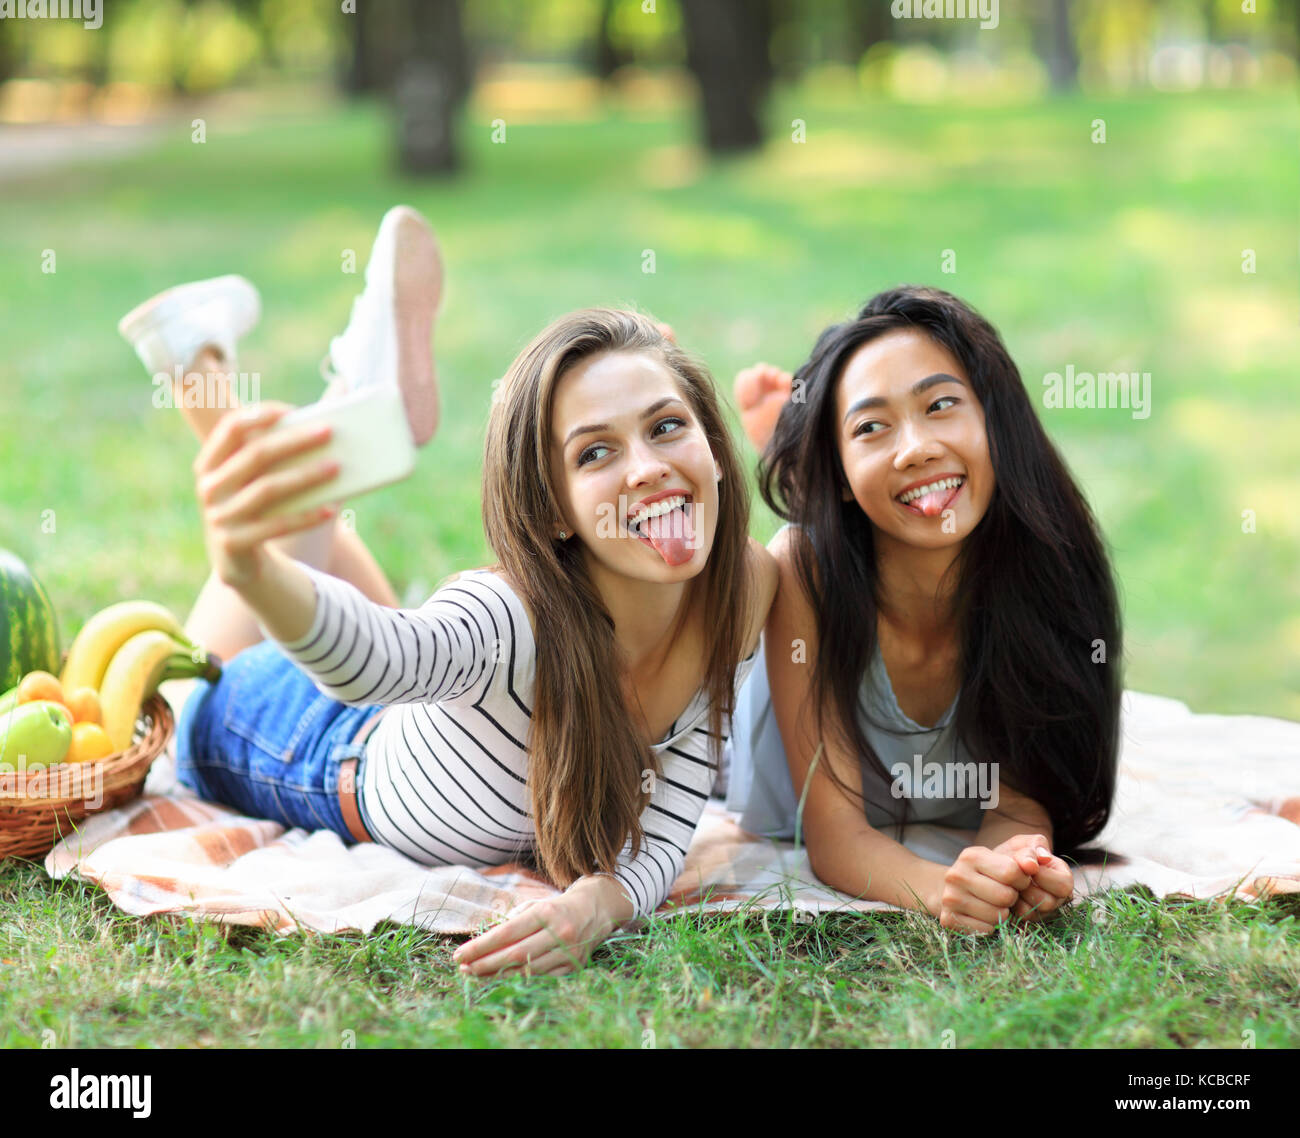 Caucasian and Asian young woman doing selfie and showing tongues. Funny girl friends having fun in free time in sunny park. International women friend Stock Photo